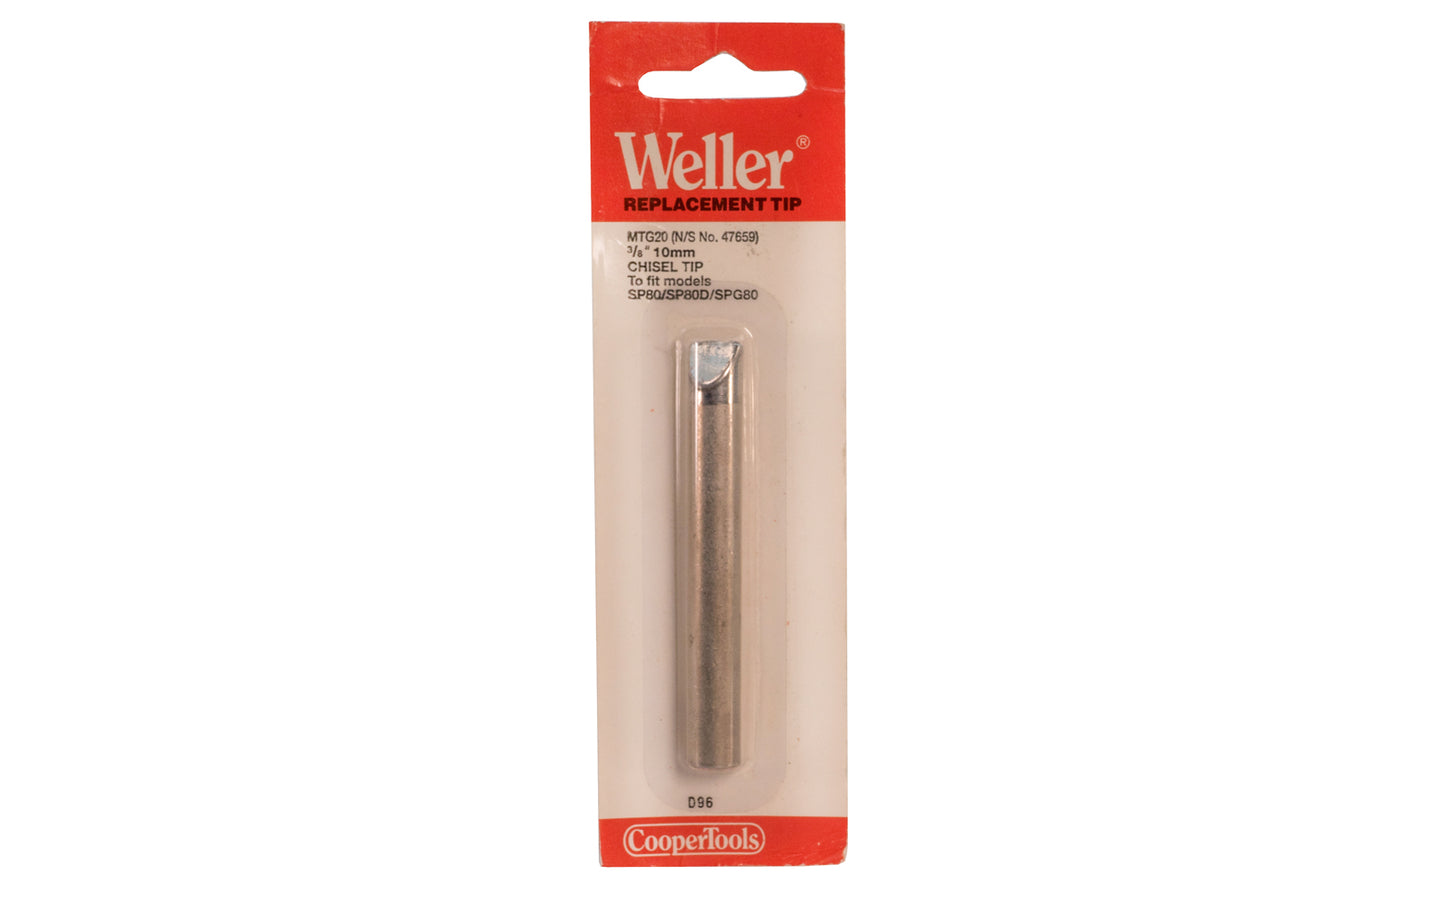 Weller 3/8" Chisel Tip - MTG20. One replacement tip in pack.   Made by Weller - Cooper Tools. Designed for model SP80, SP80D, SPG80.  Made in USA.